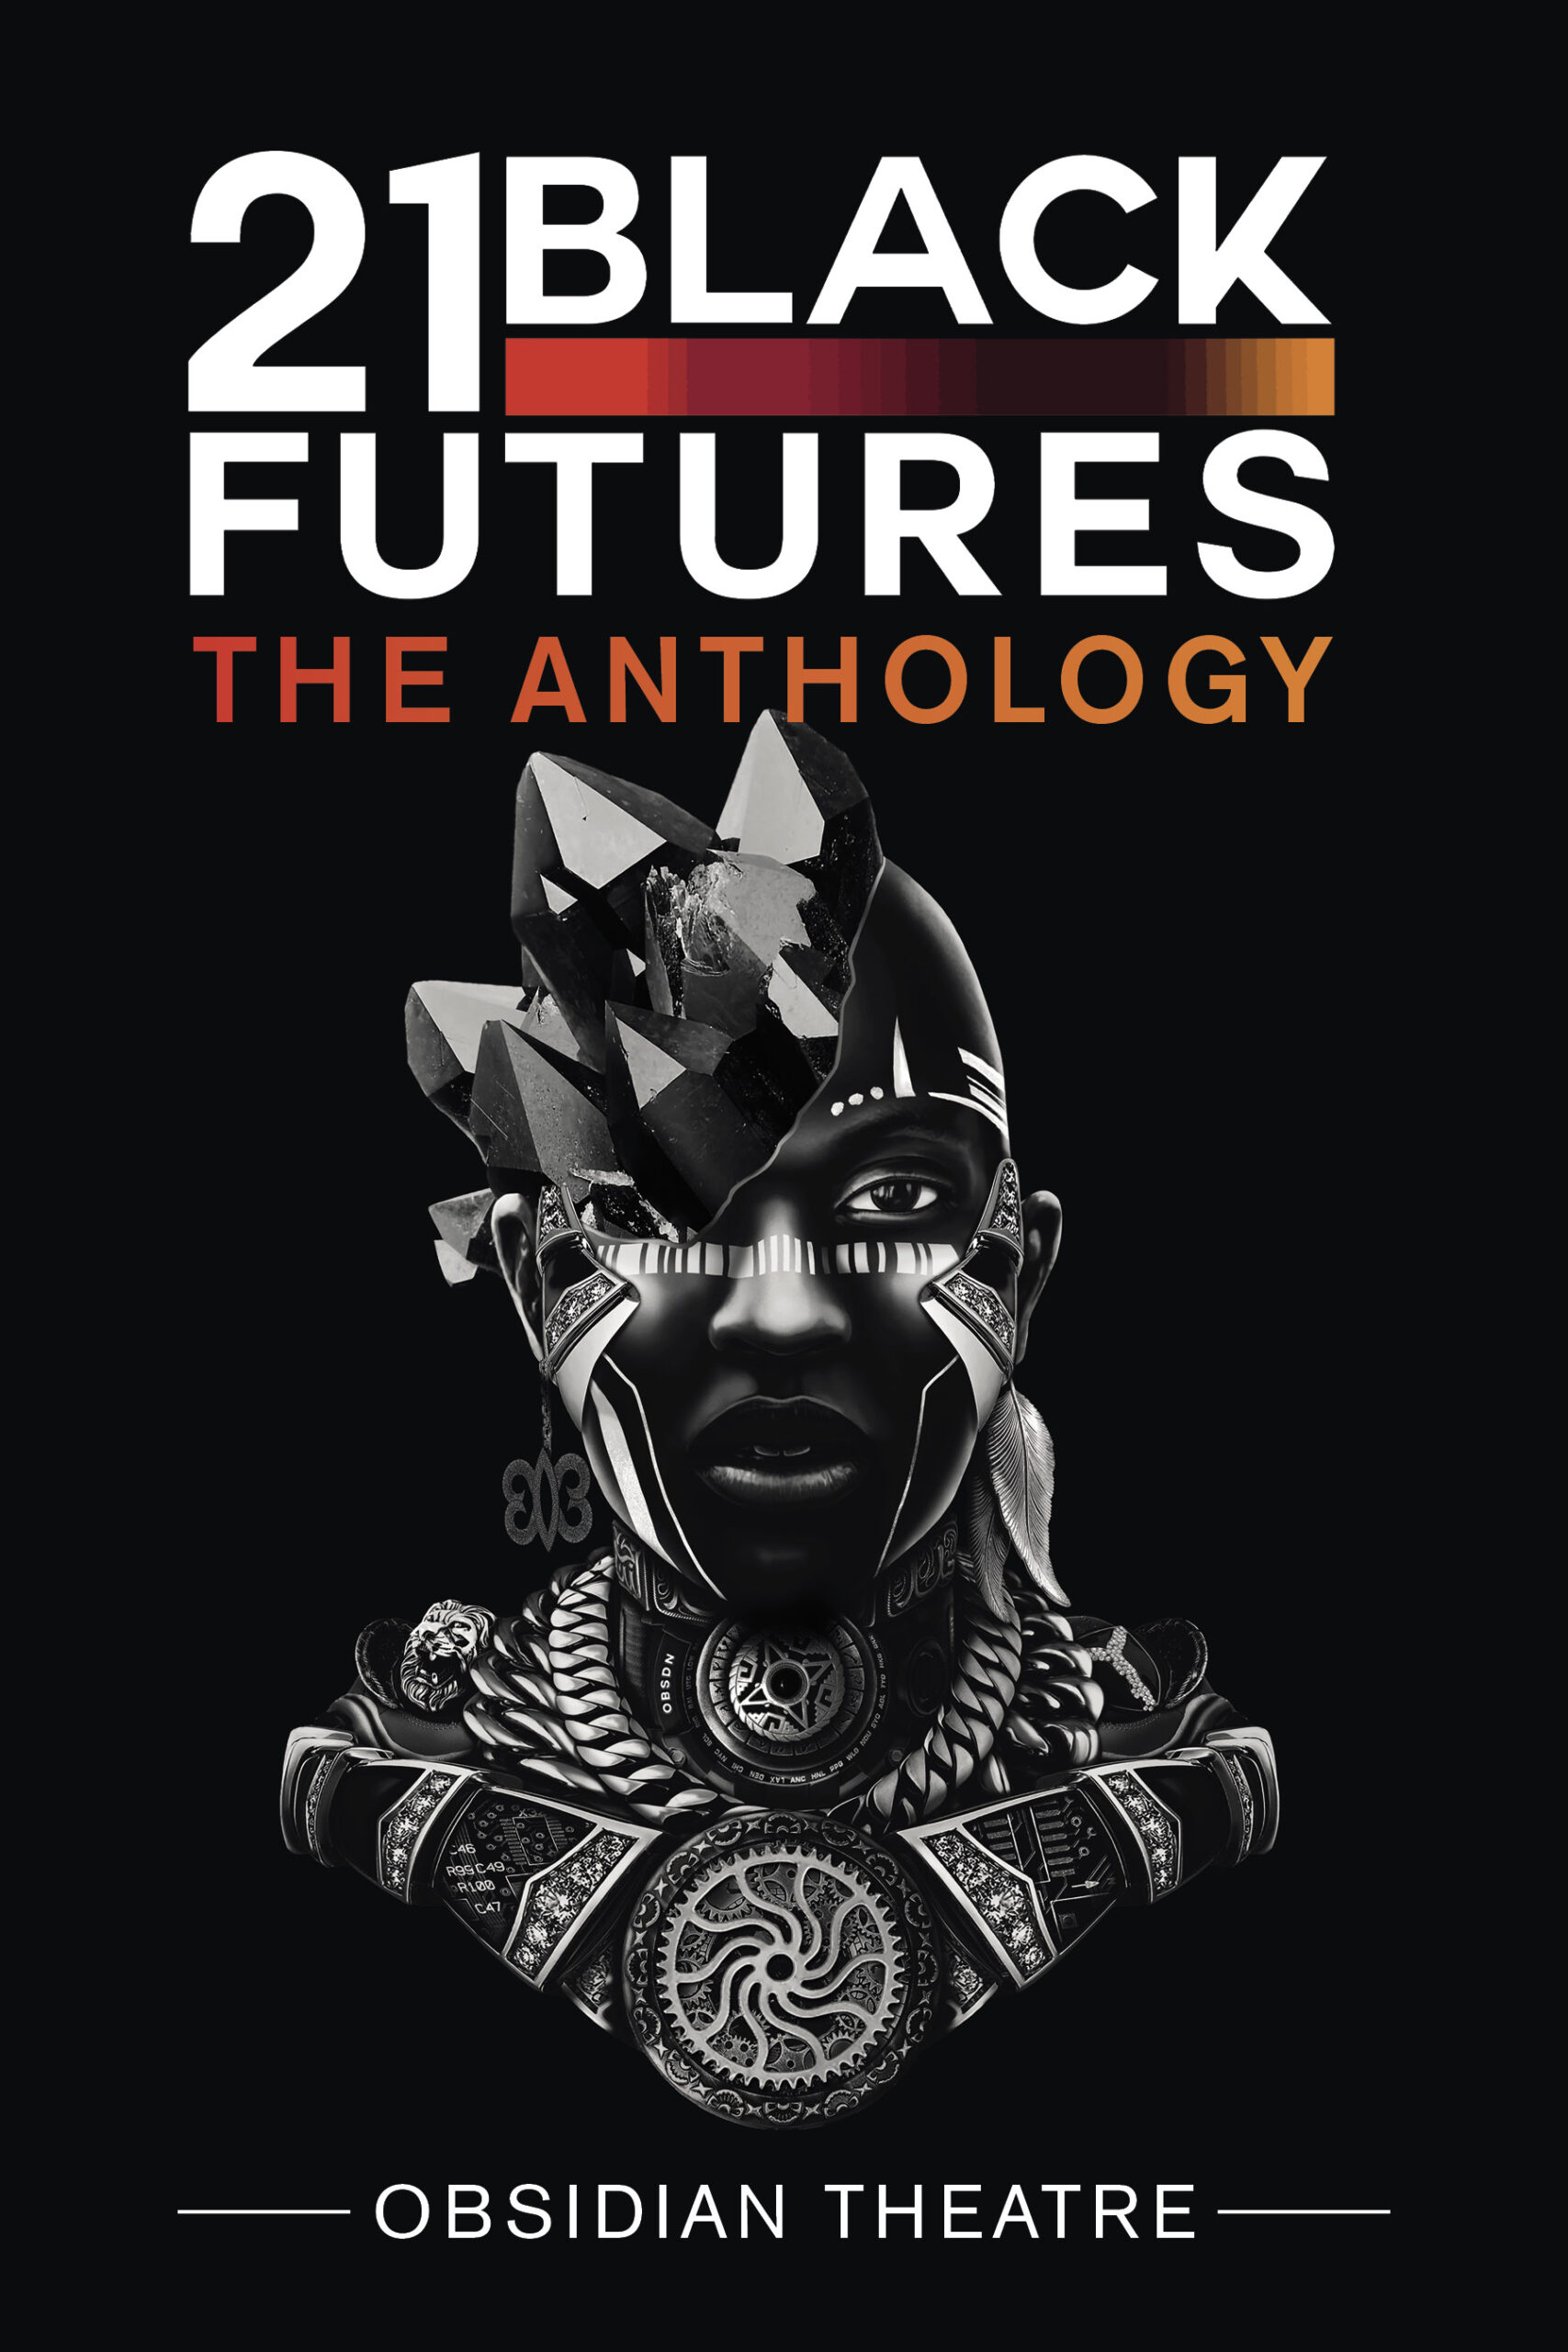 The cover of 21 Black Futures